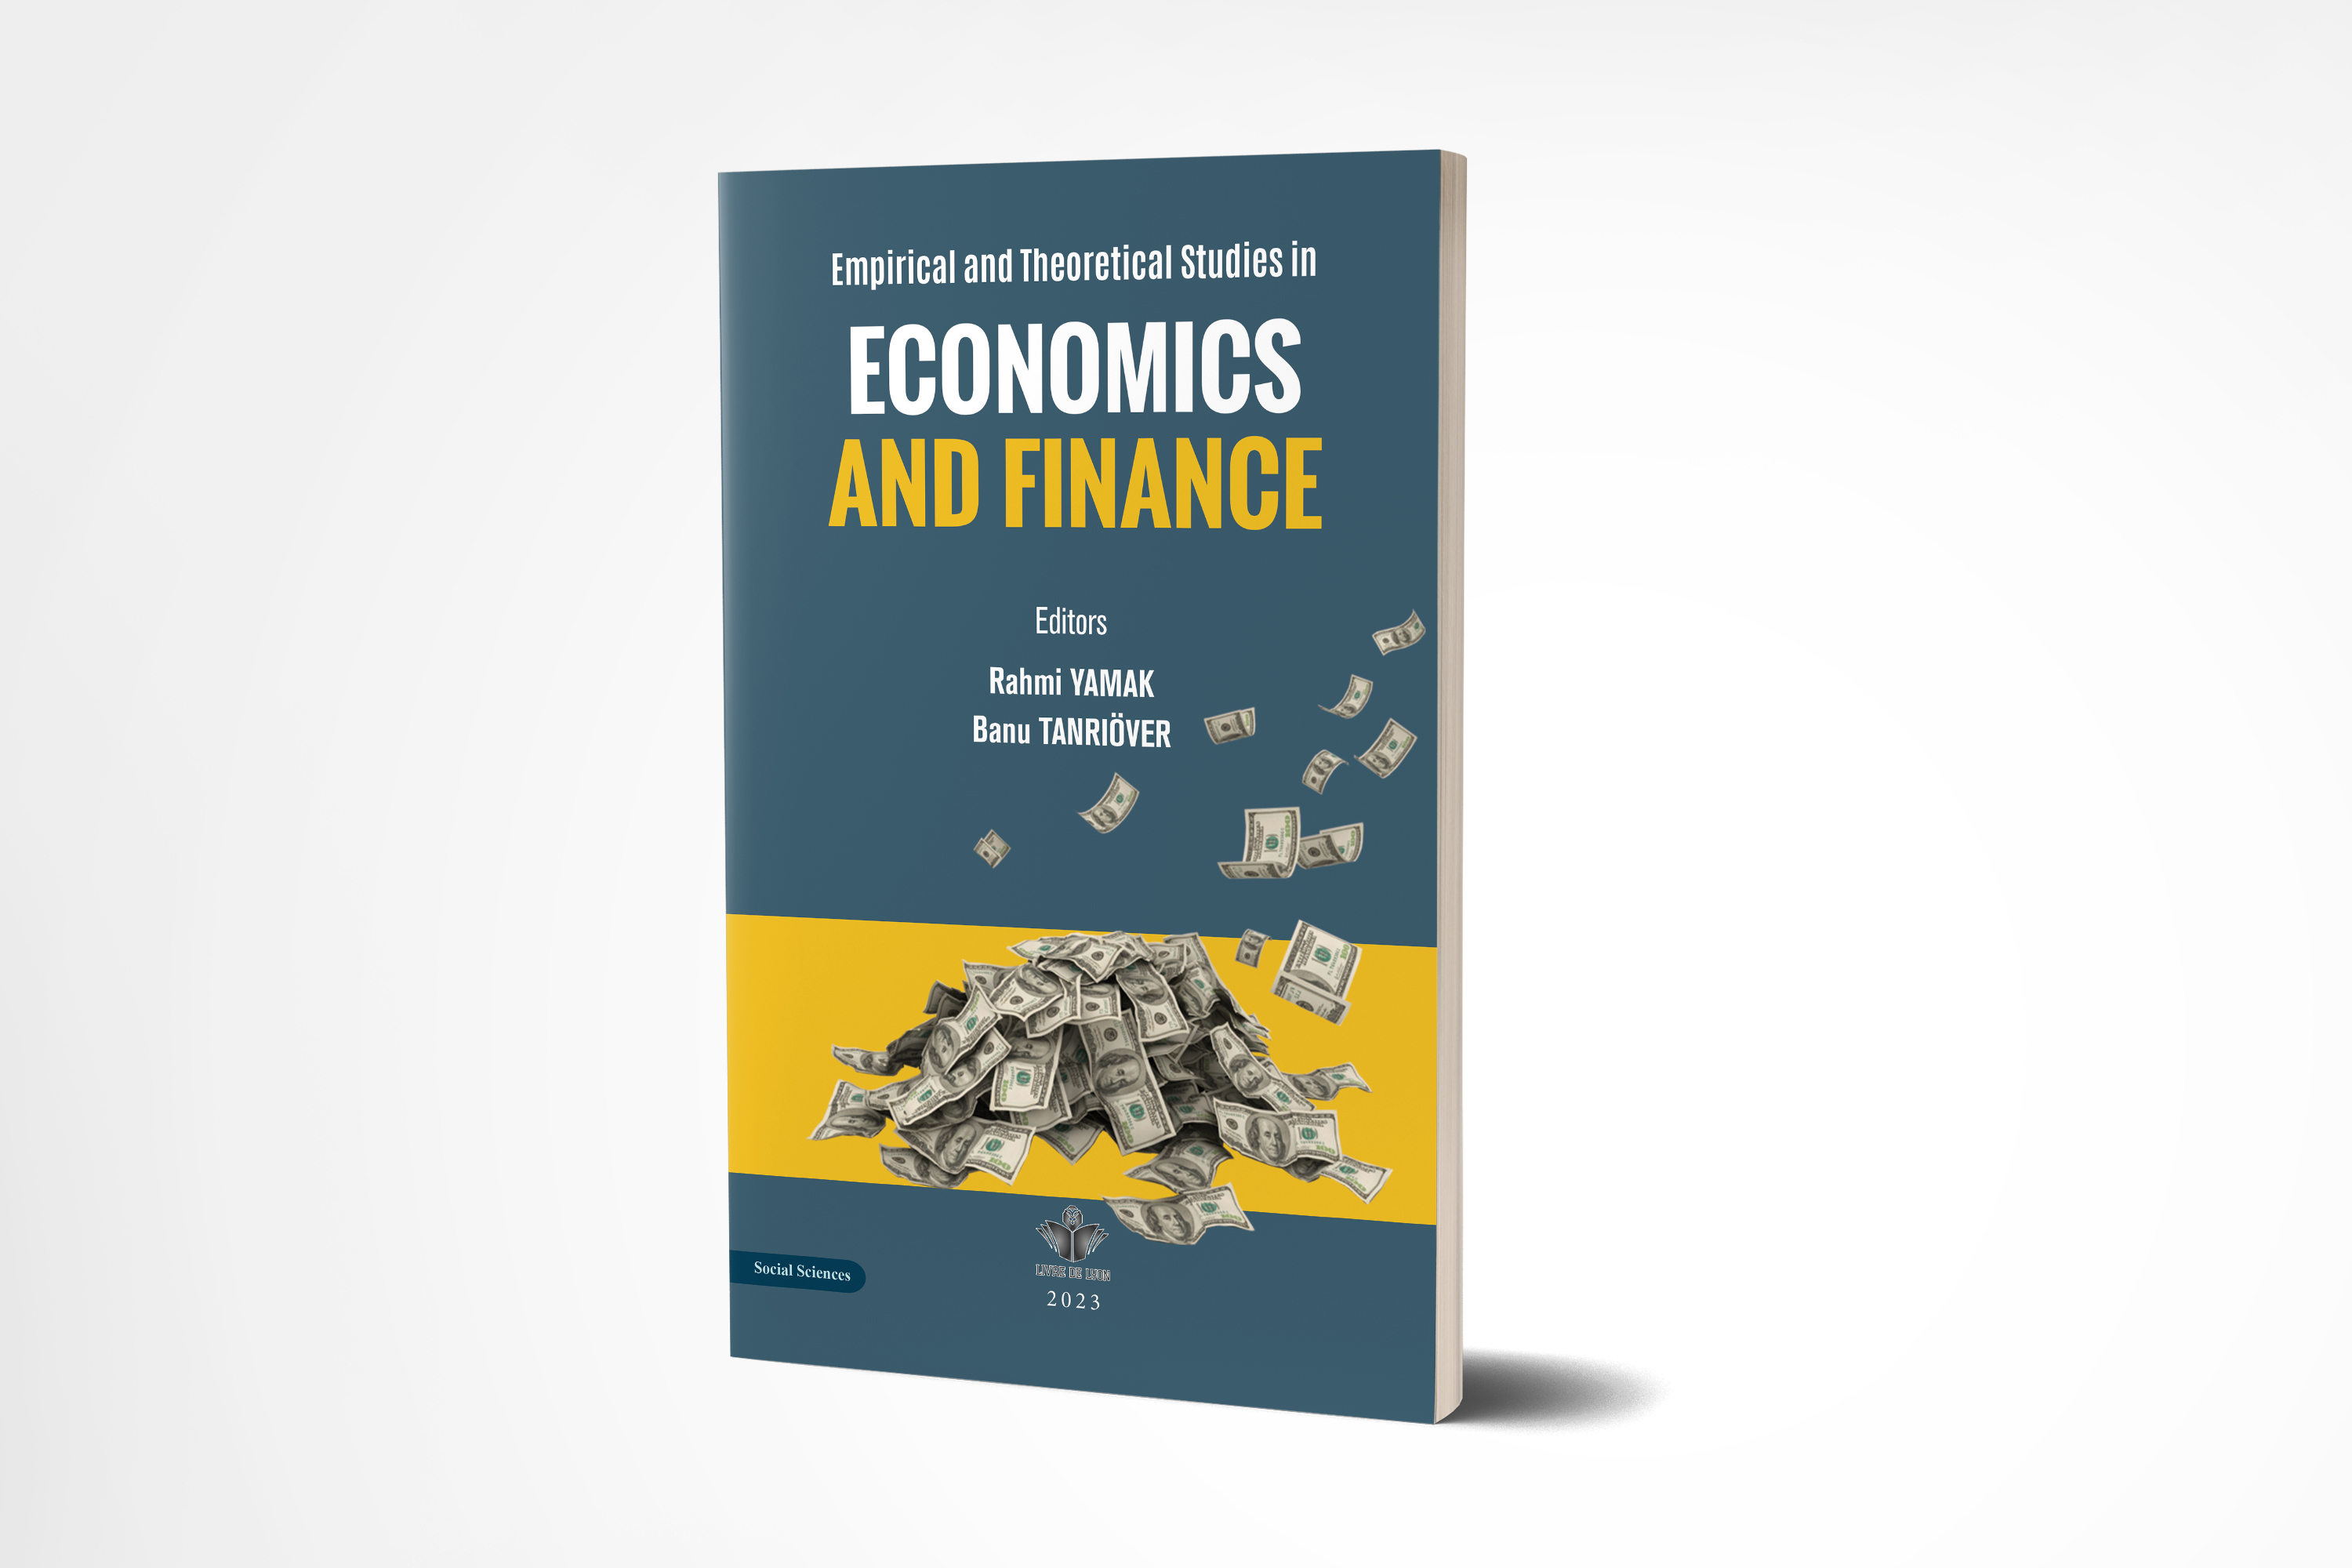 Empirical and Theoretical Studies in Economics and Finance